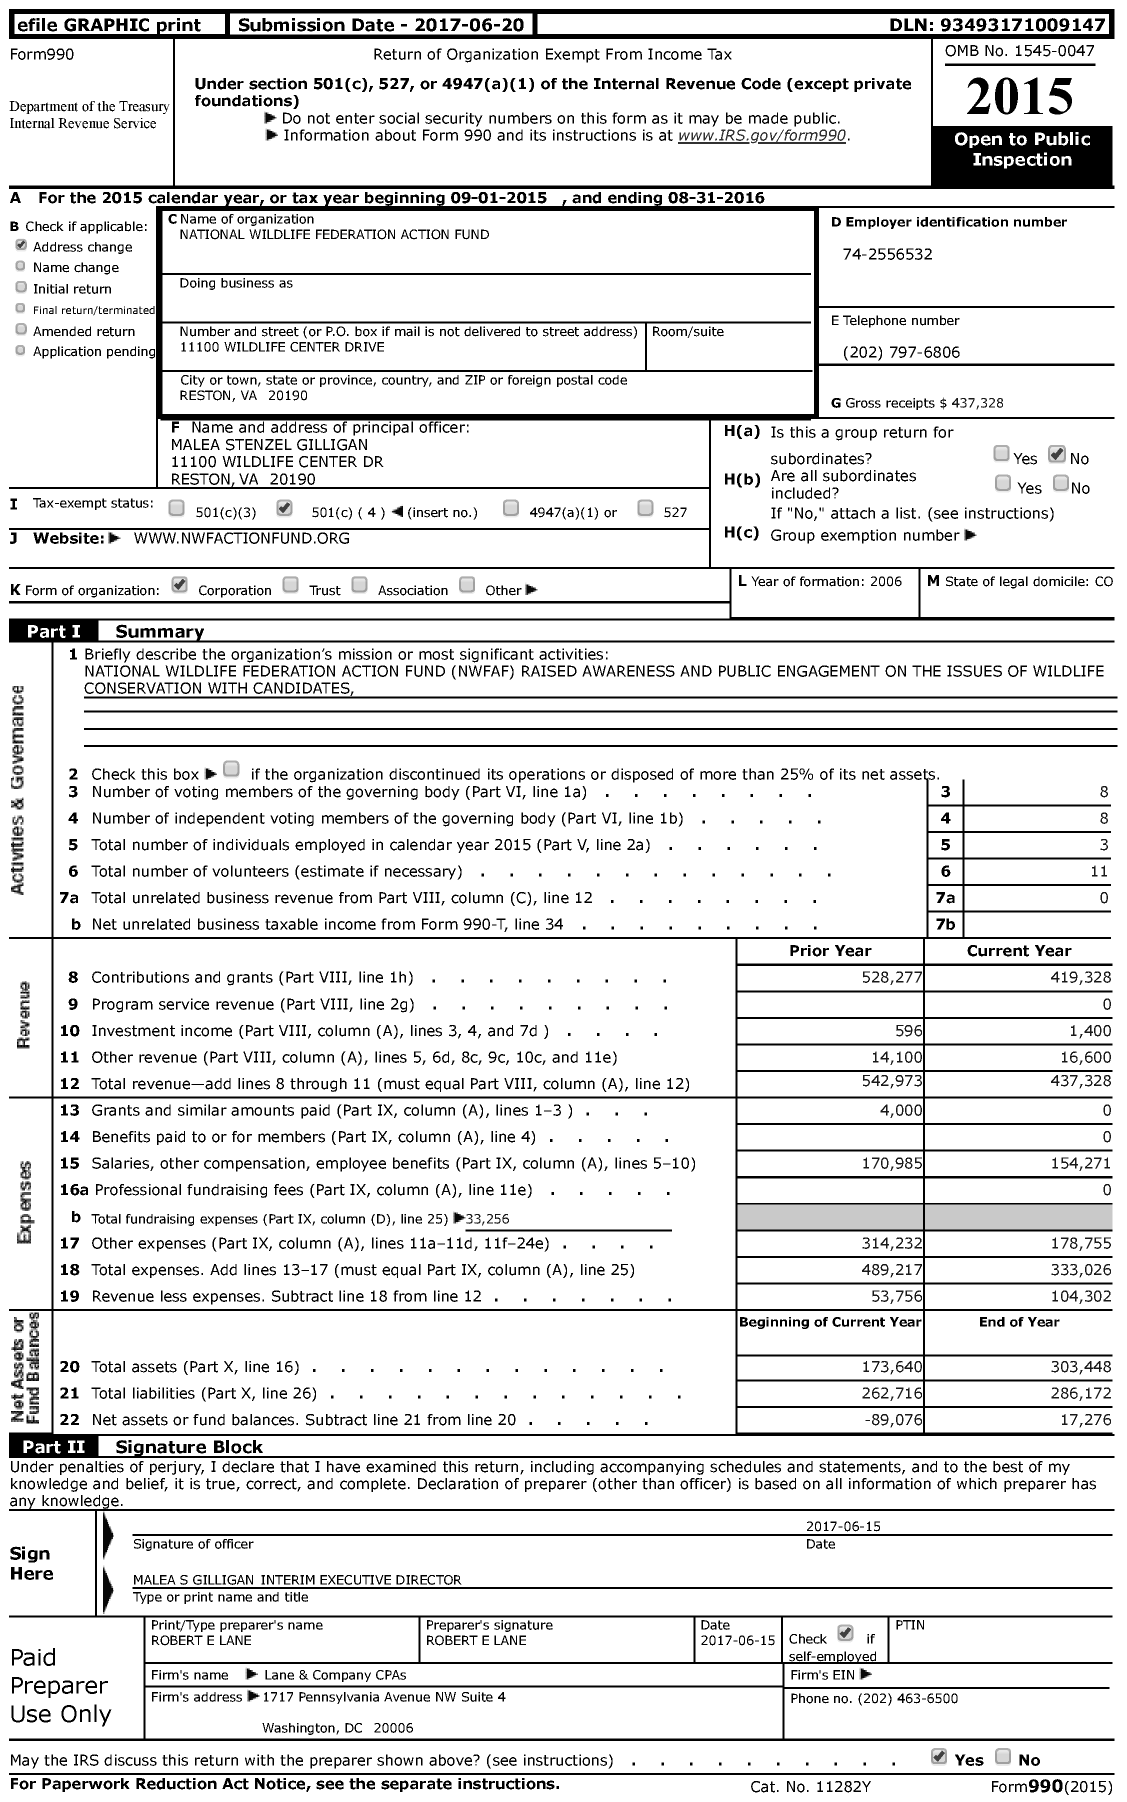 Image of first page of 2015 Form 990 for National Wildlife Federation Action Fund